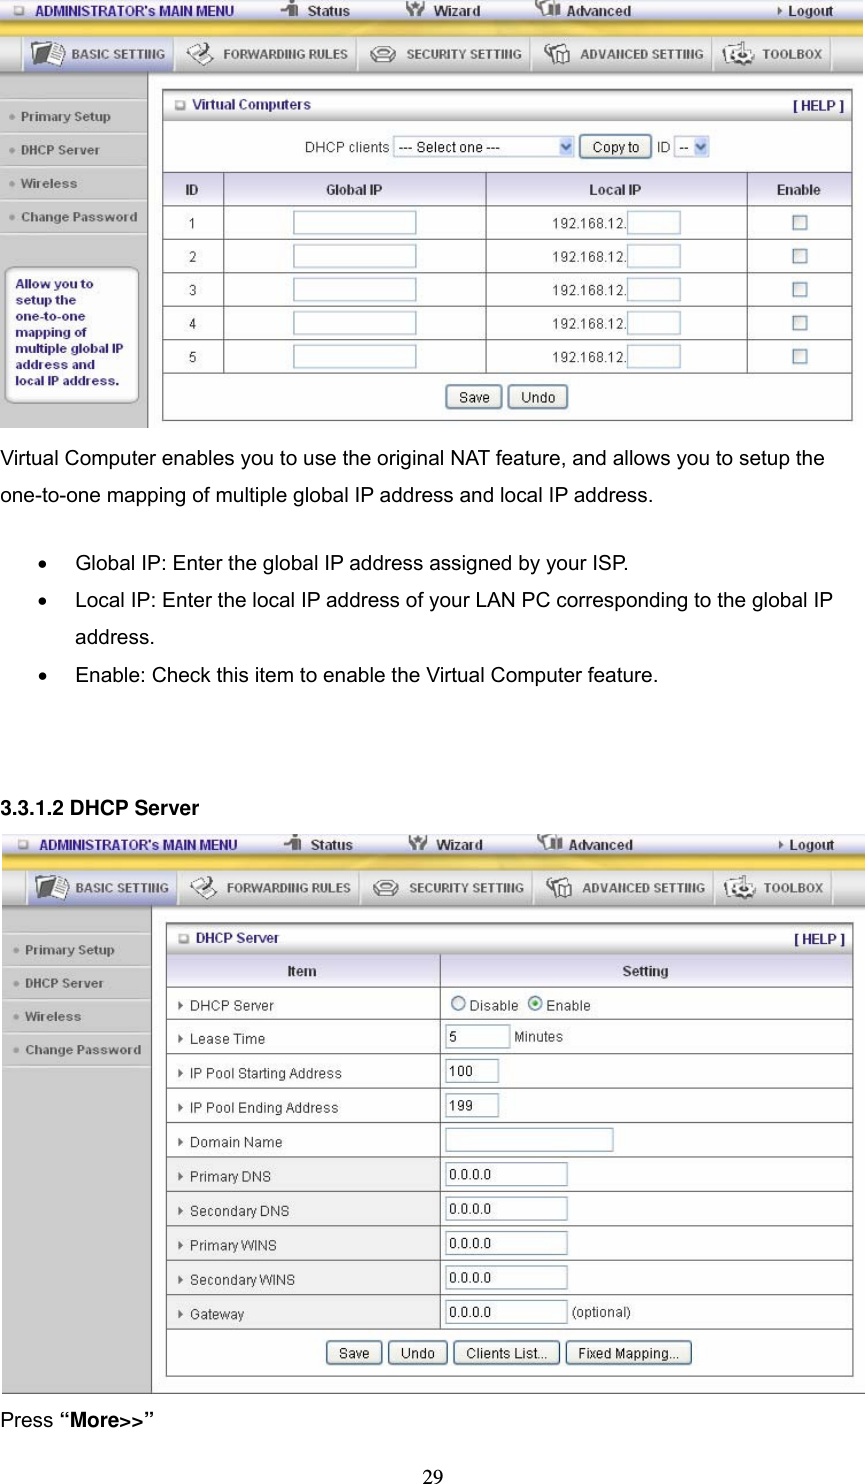  29  Virtual Computer enables you to use the original NAT feature, and allows you to setup the one-to-one mapping of multiple global IP address and local IP address.   •  Global IP: Enter the global IP address assigned by your ISP.   •  Local IP: Enter the local IP address of your LAN PC corresponding to the global IP address.  •  Enable: Check this item to enable the Virtual Computer feature.    3.3.1.2 DHCP Server  Press “More&gt;&gt;” 